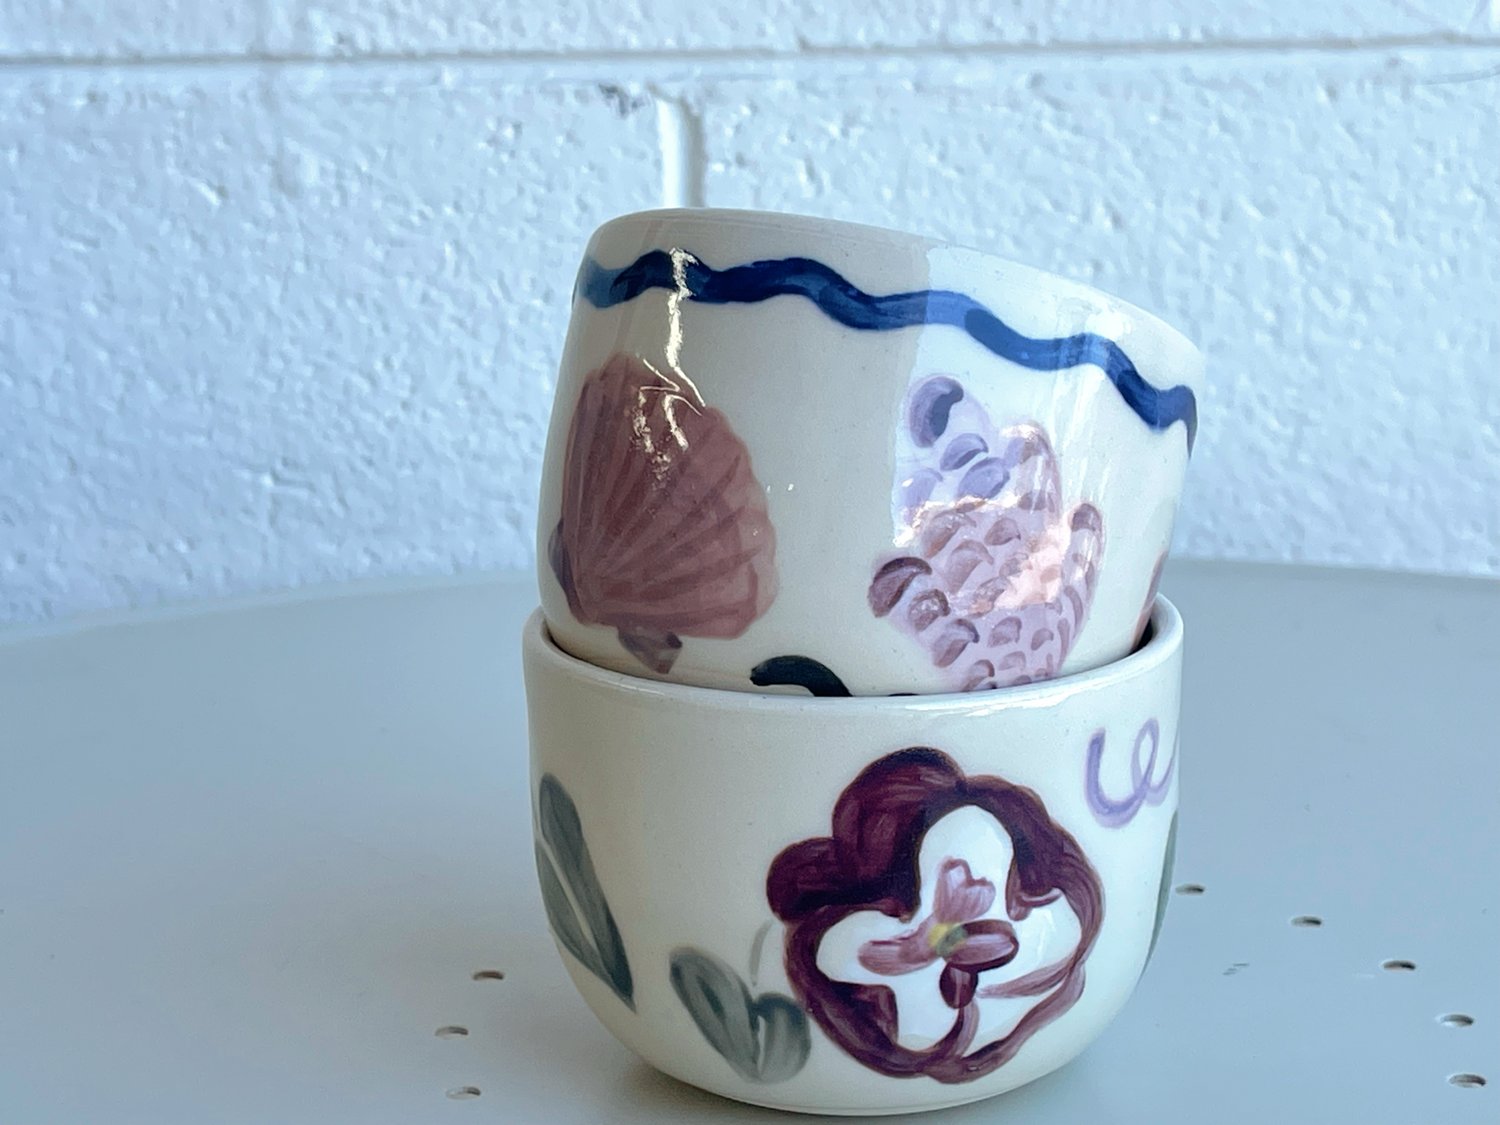 Stone Studio x Lisa Hu | A Special Mother's Day Collaboration